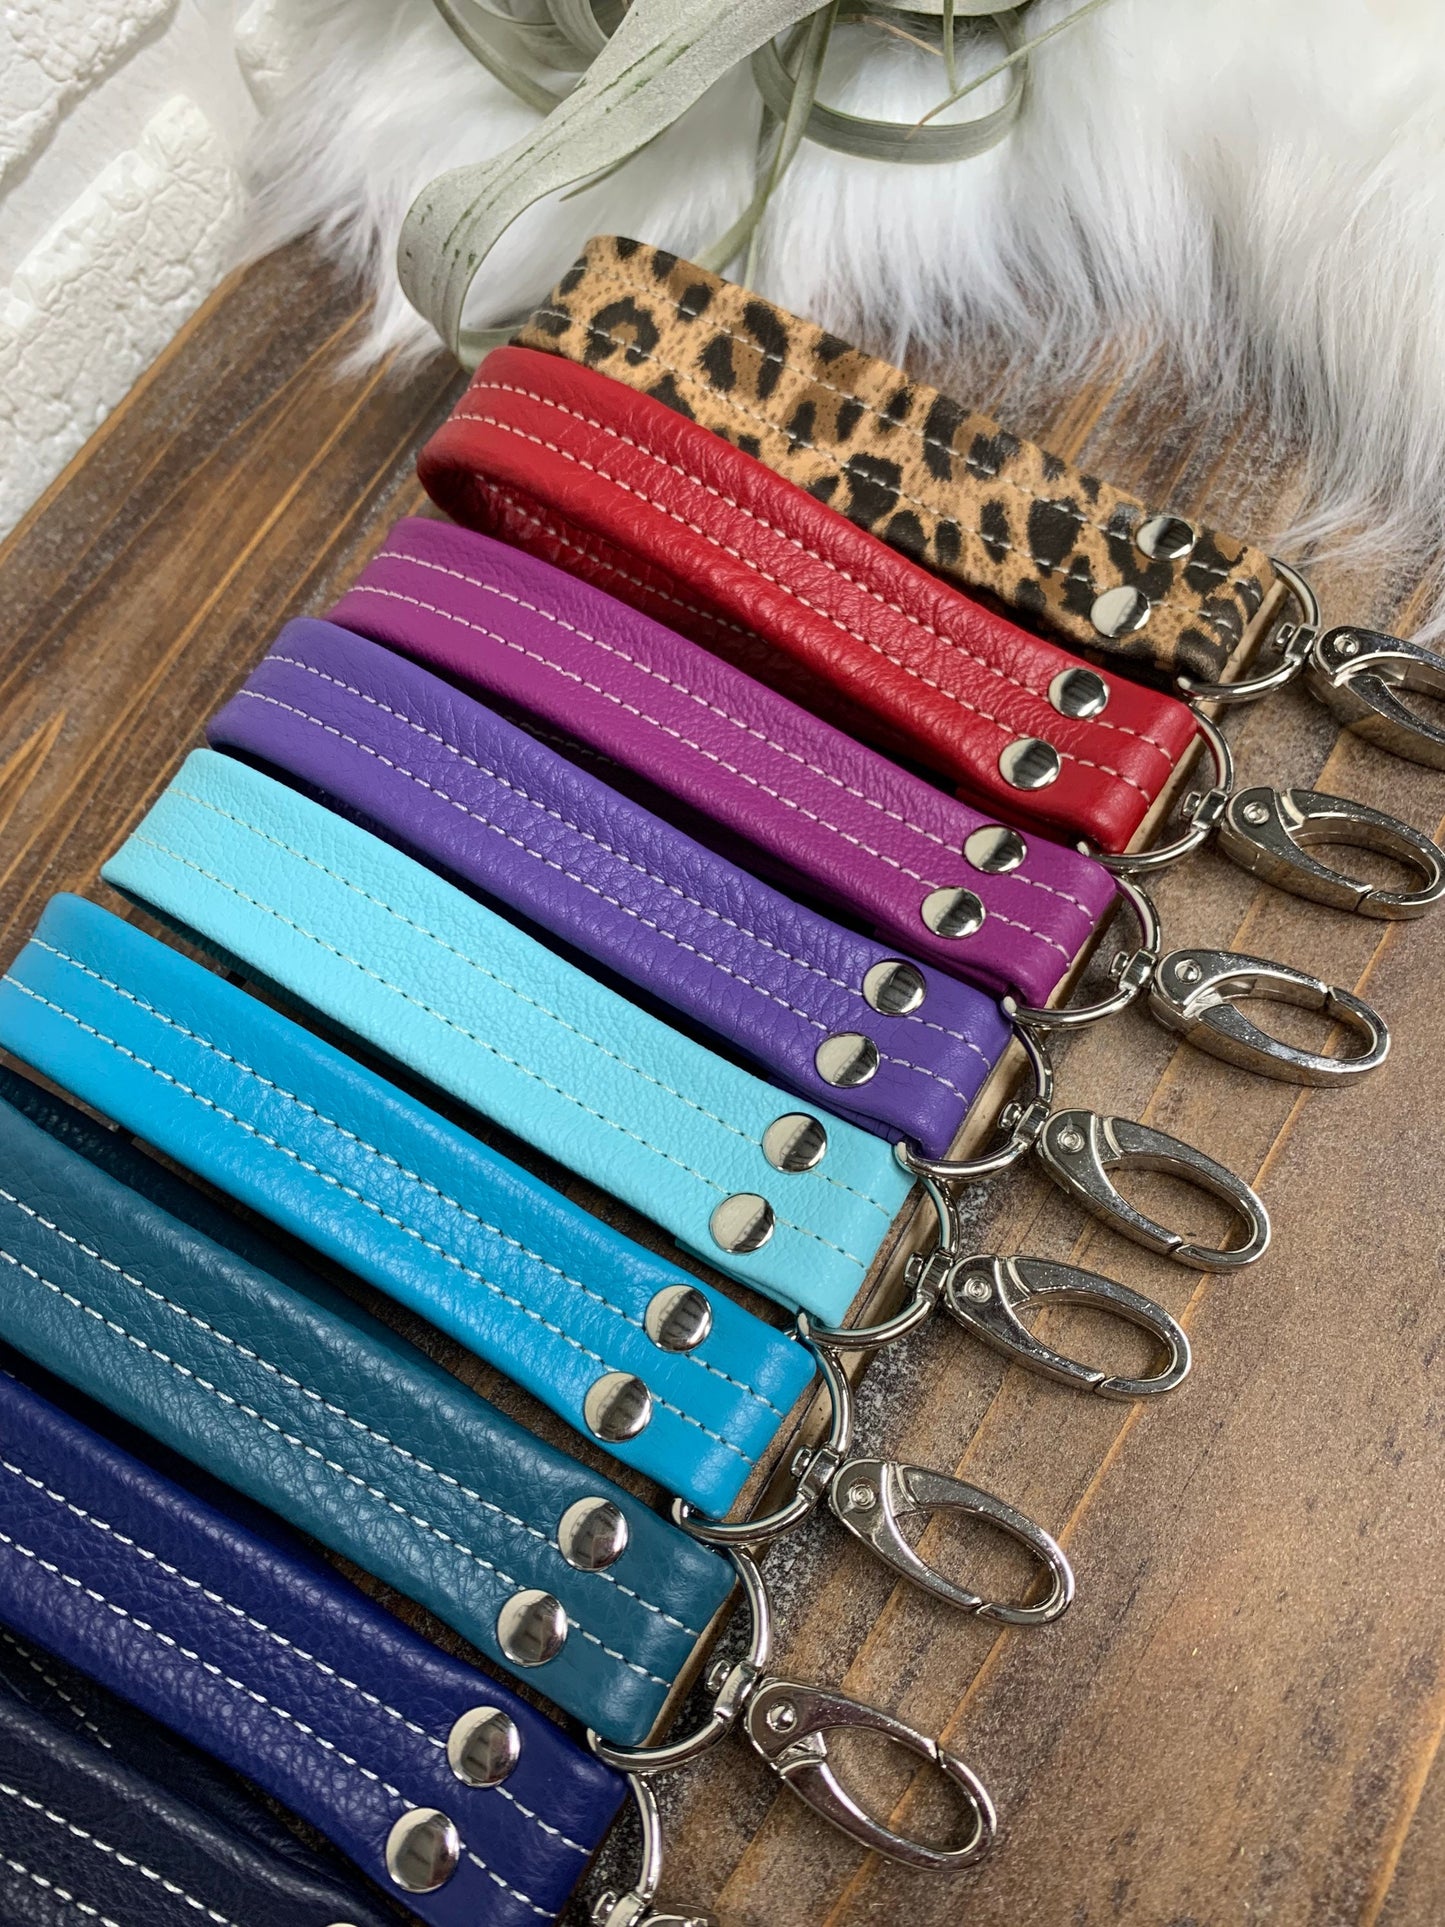 Leather key fob, genuine leather wristlet, leather wrist strap, accessory, gift, Maine made, leopard leather fob wristlet